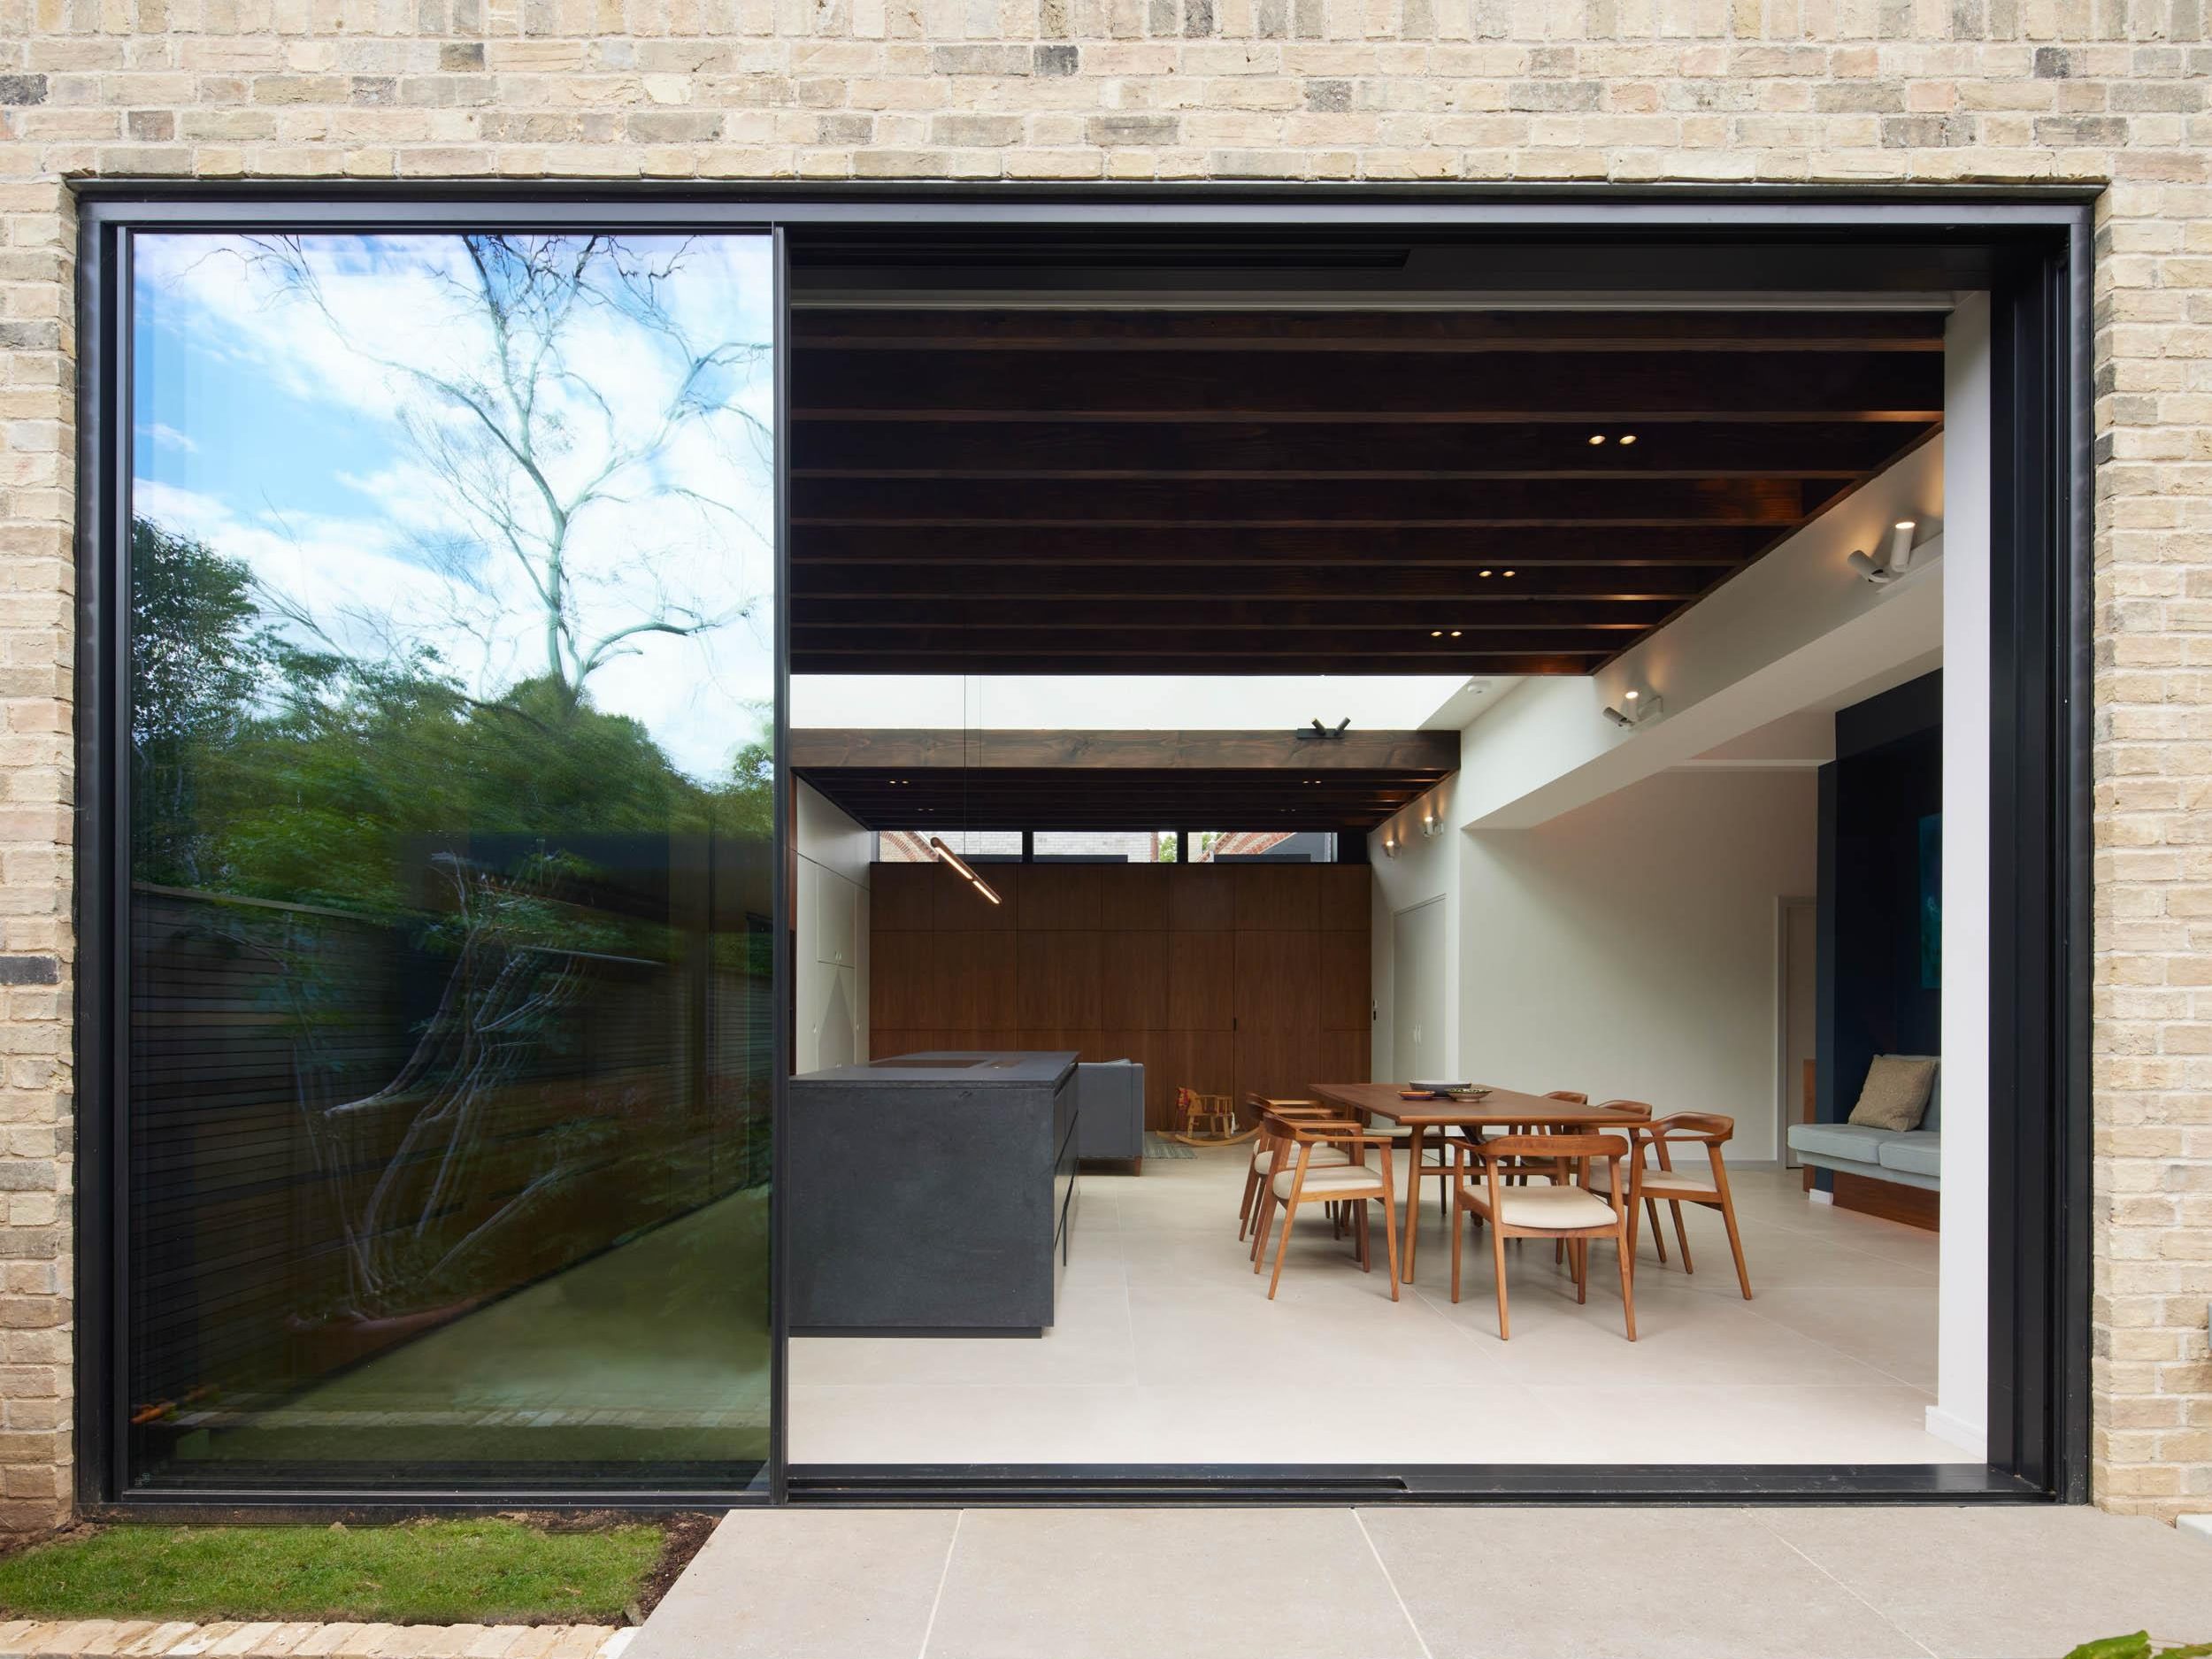 view from the garden of a contemporary kitchen and dining area | cdc studio cambridge architects